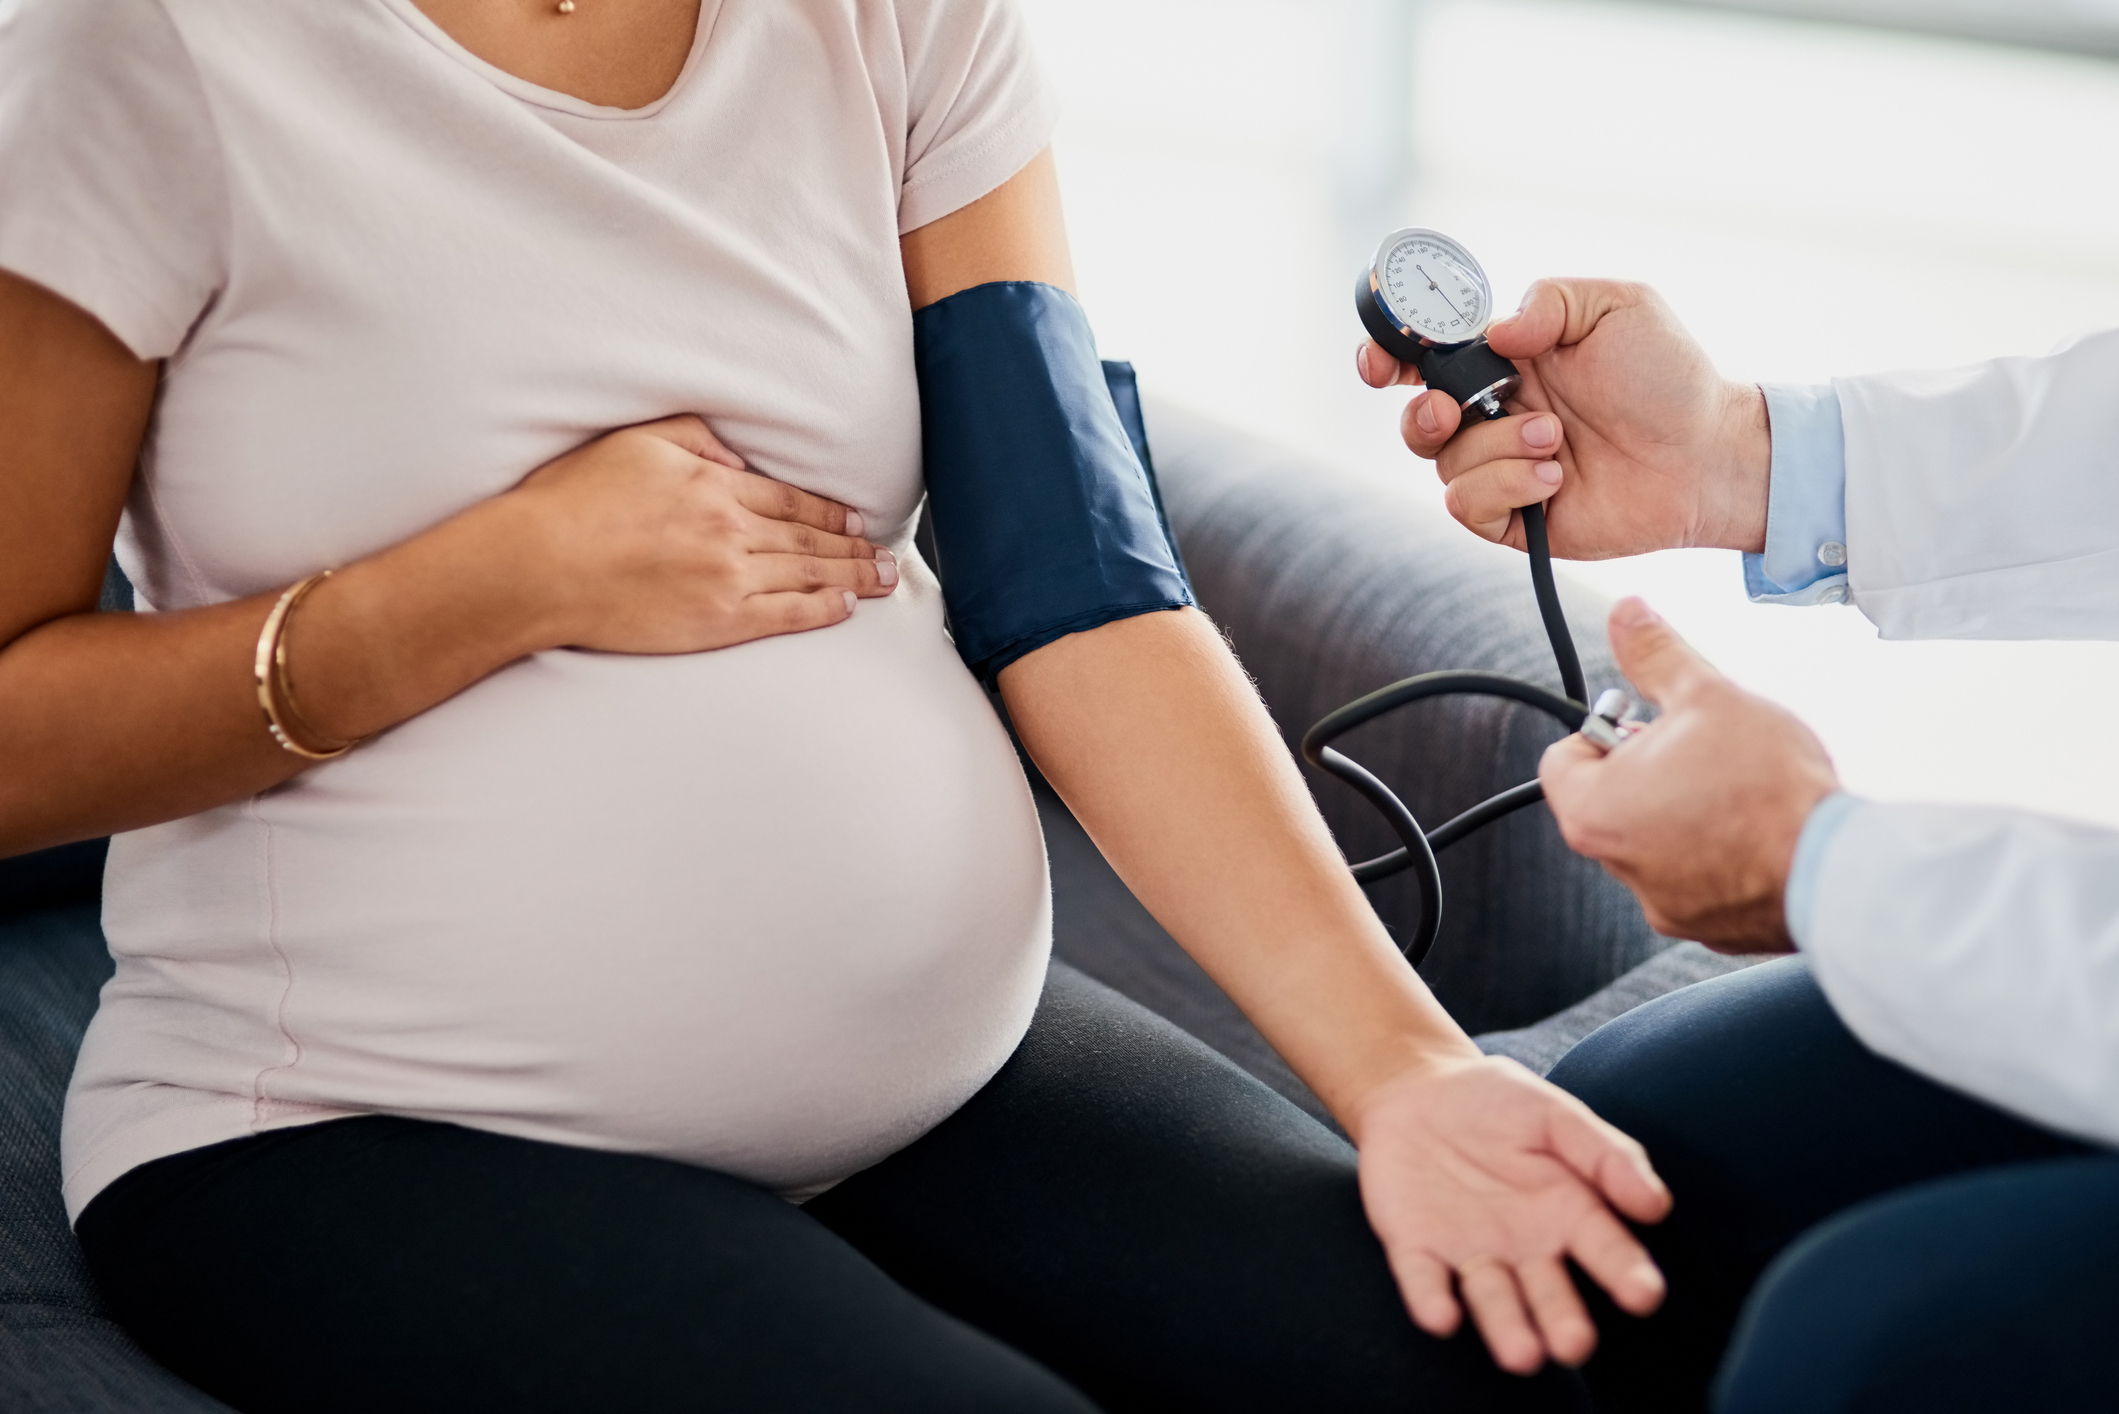 Image of a pregnant woman getting blood pressure taken.